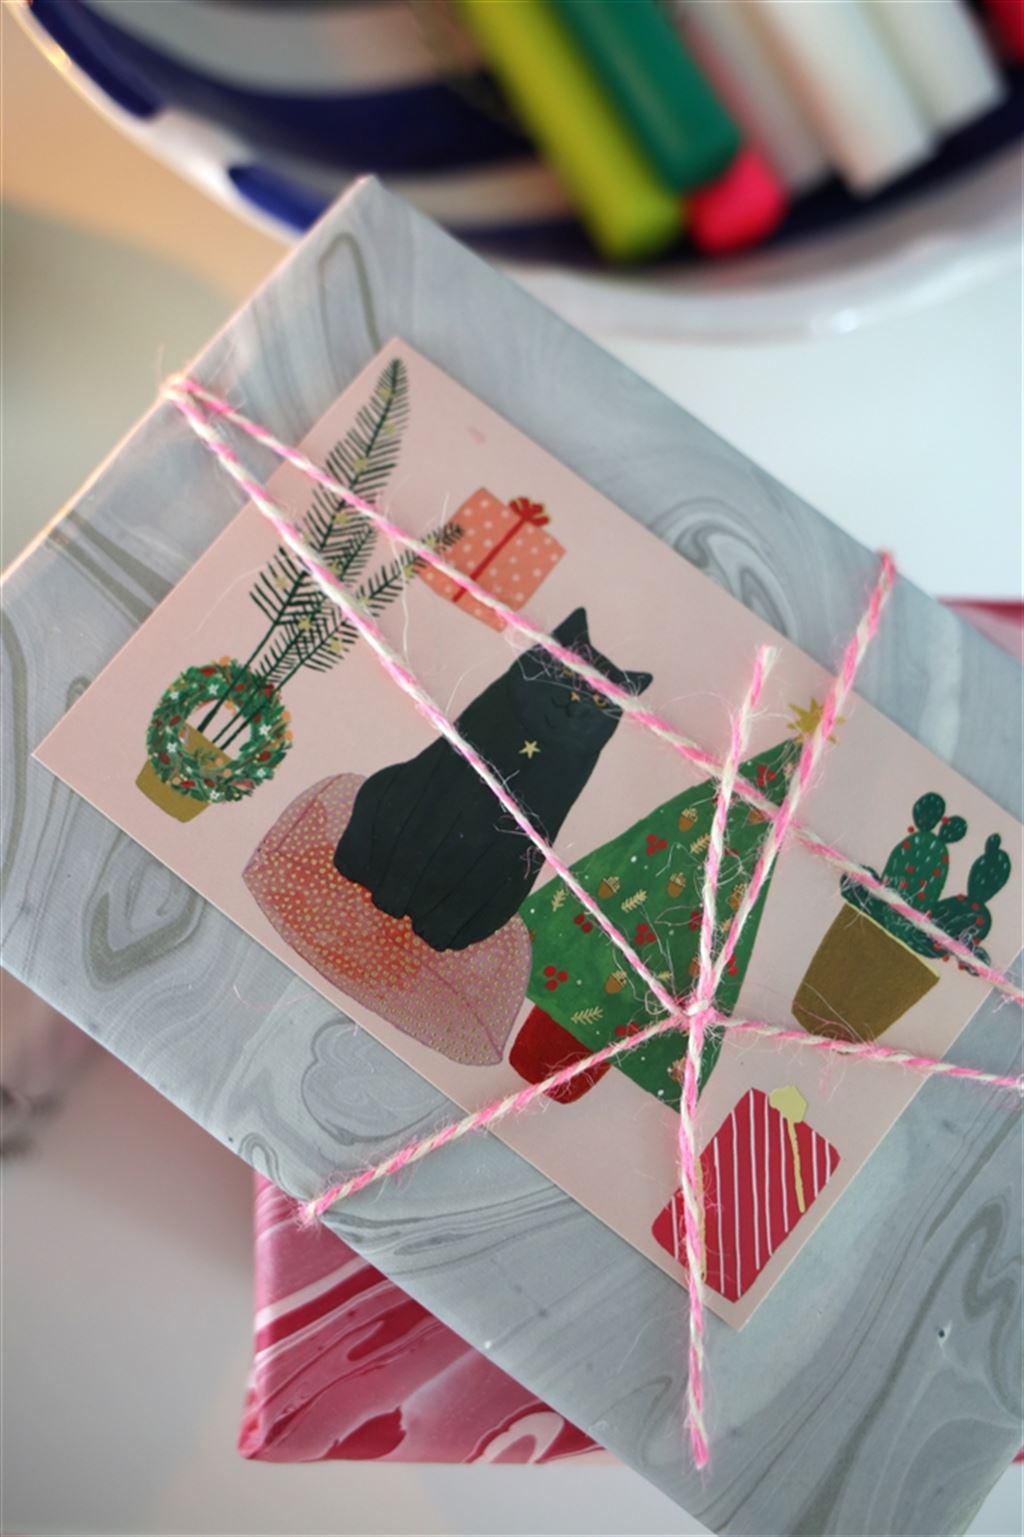 Festive Cards & Crackers